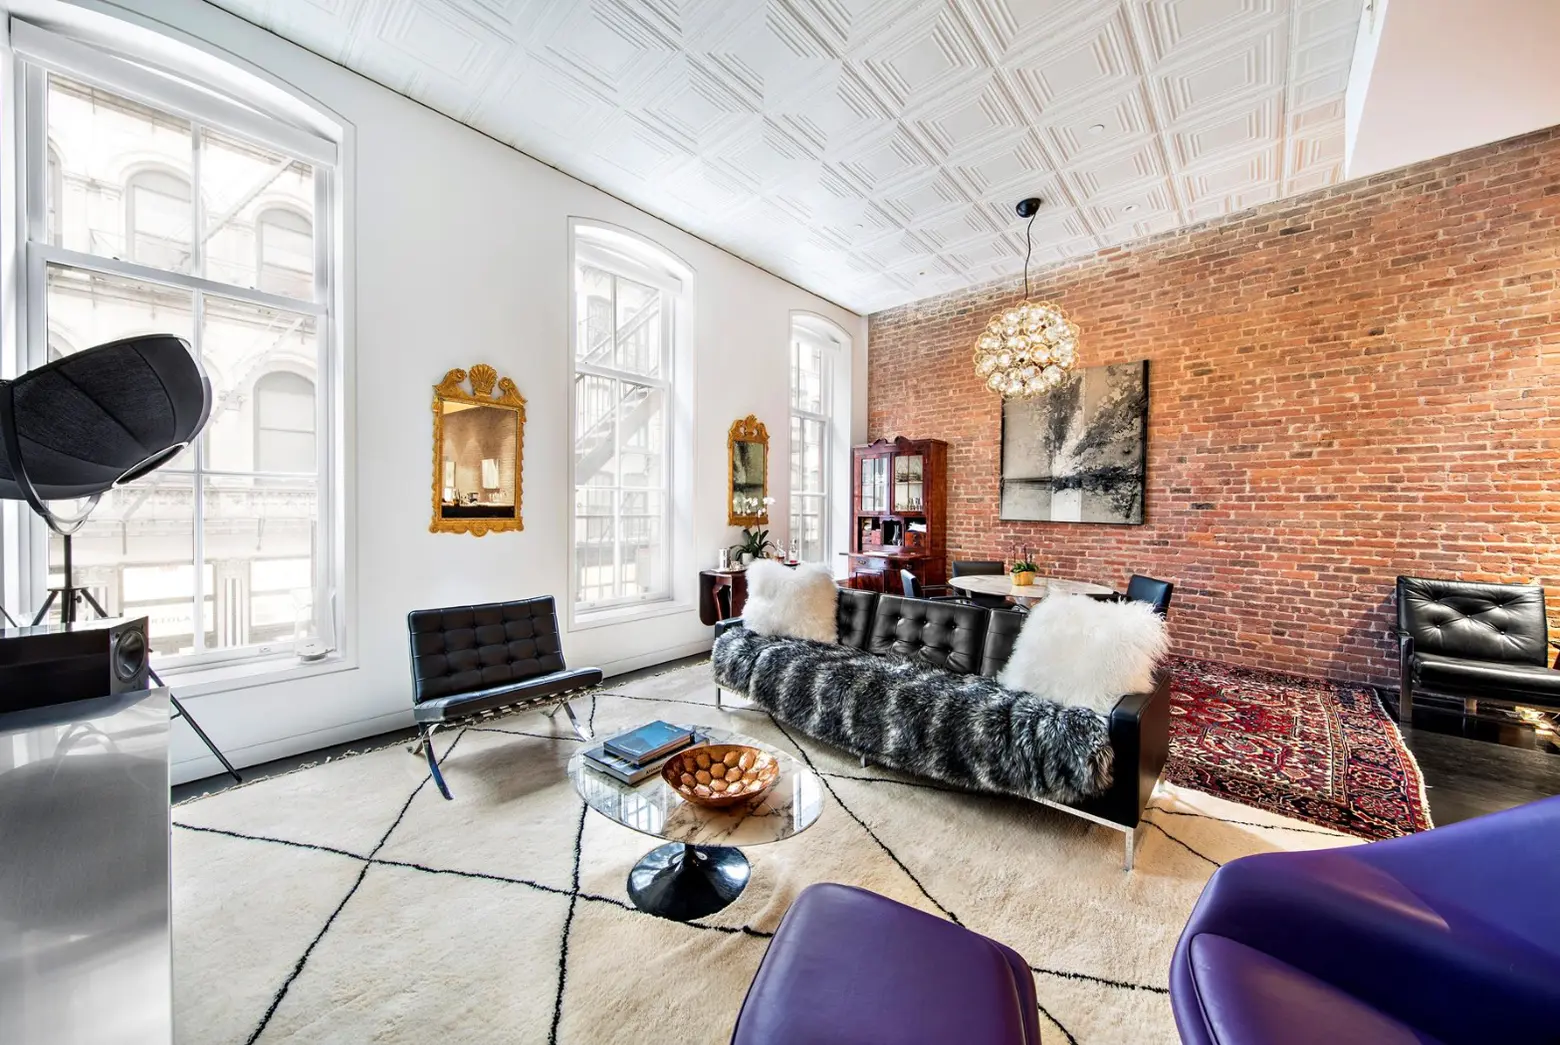 $10K per month rent seems fitting for this photo-ready Tribeca loft